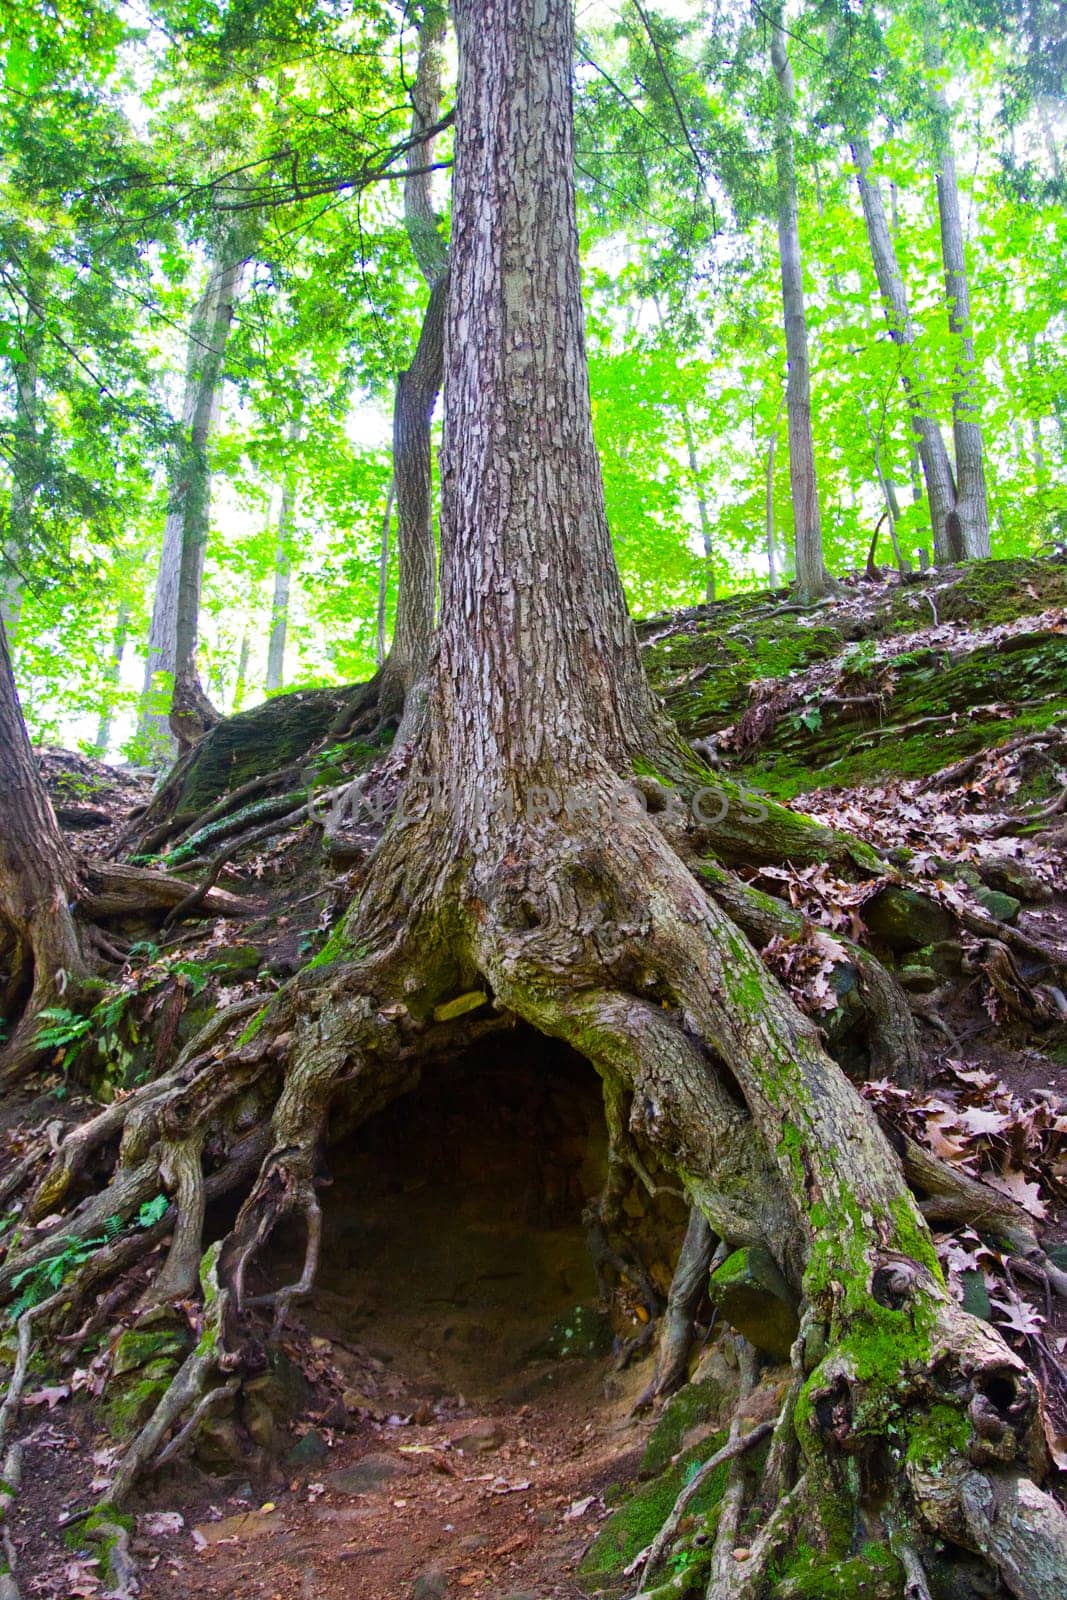 Moss-Covered Tree with Hollow Base in Verdant Michigan Forest by njproductions